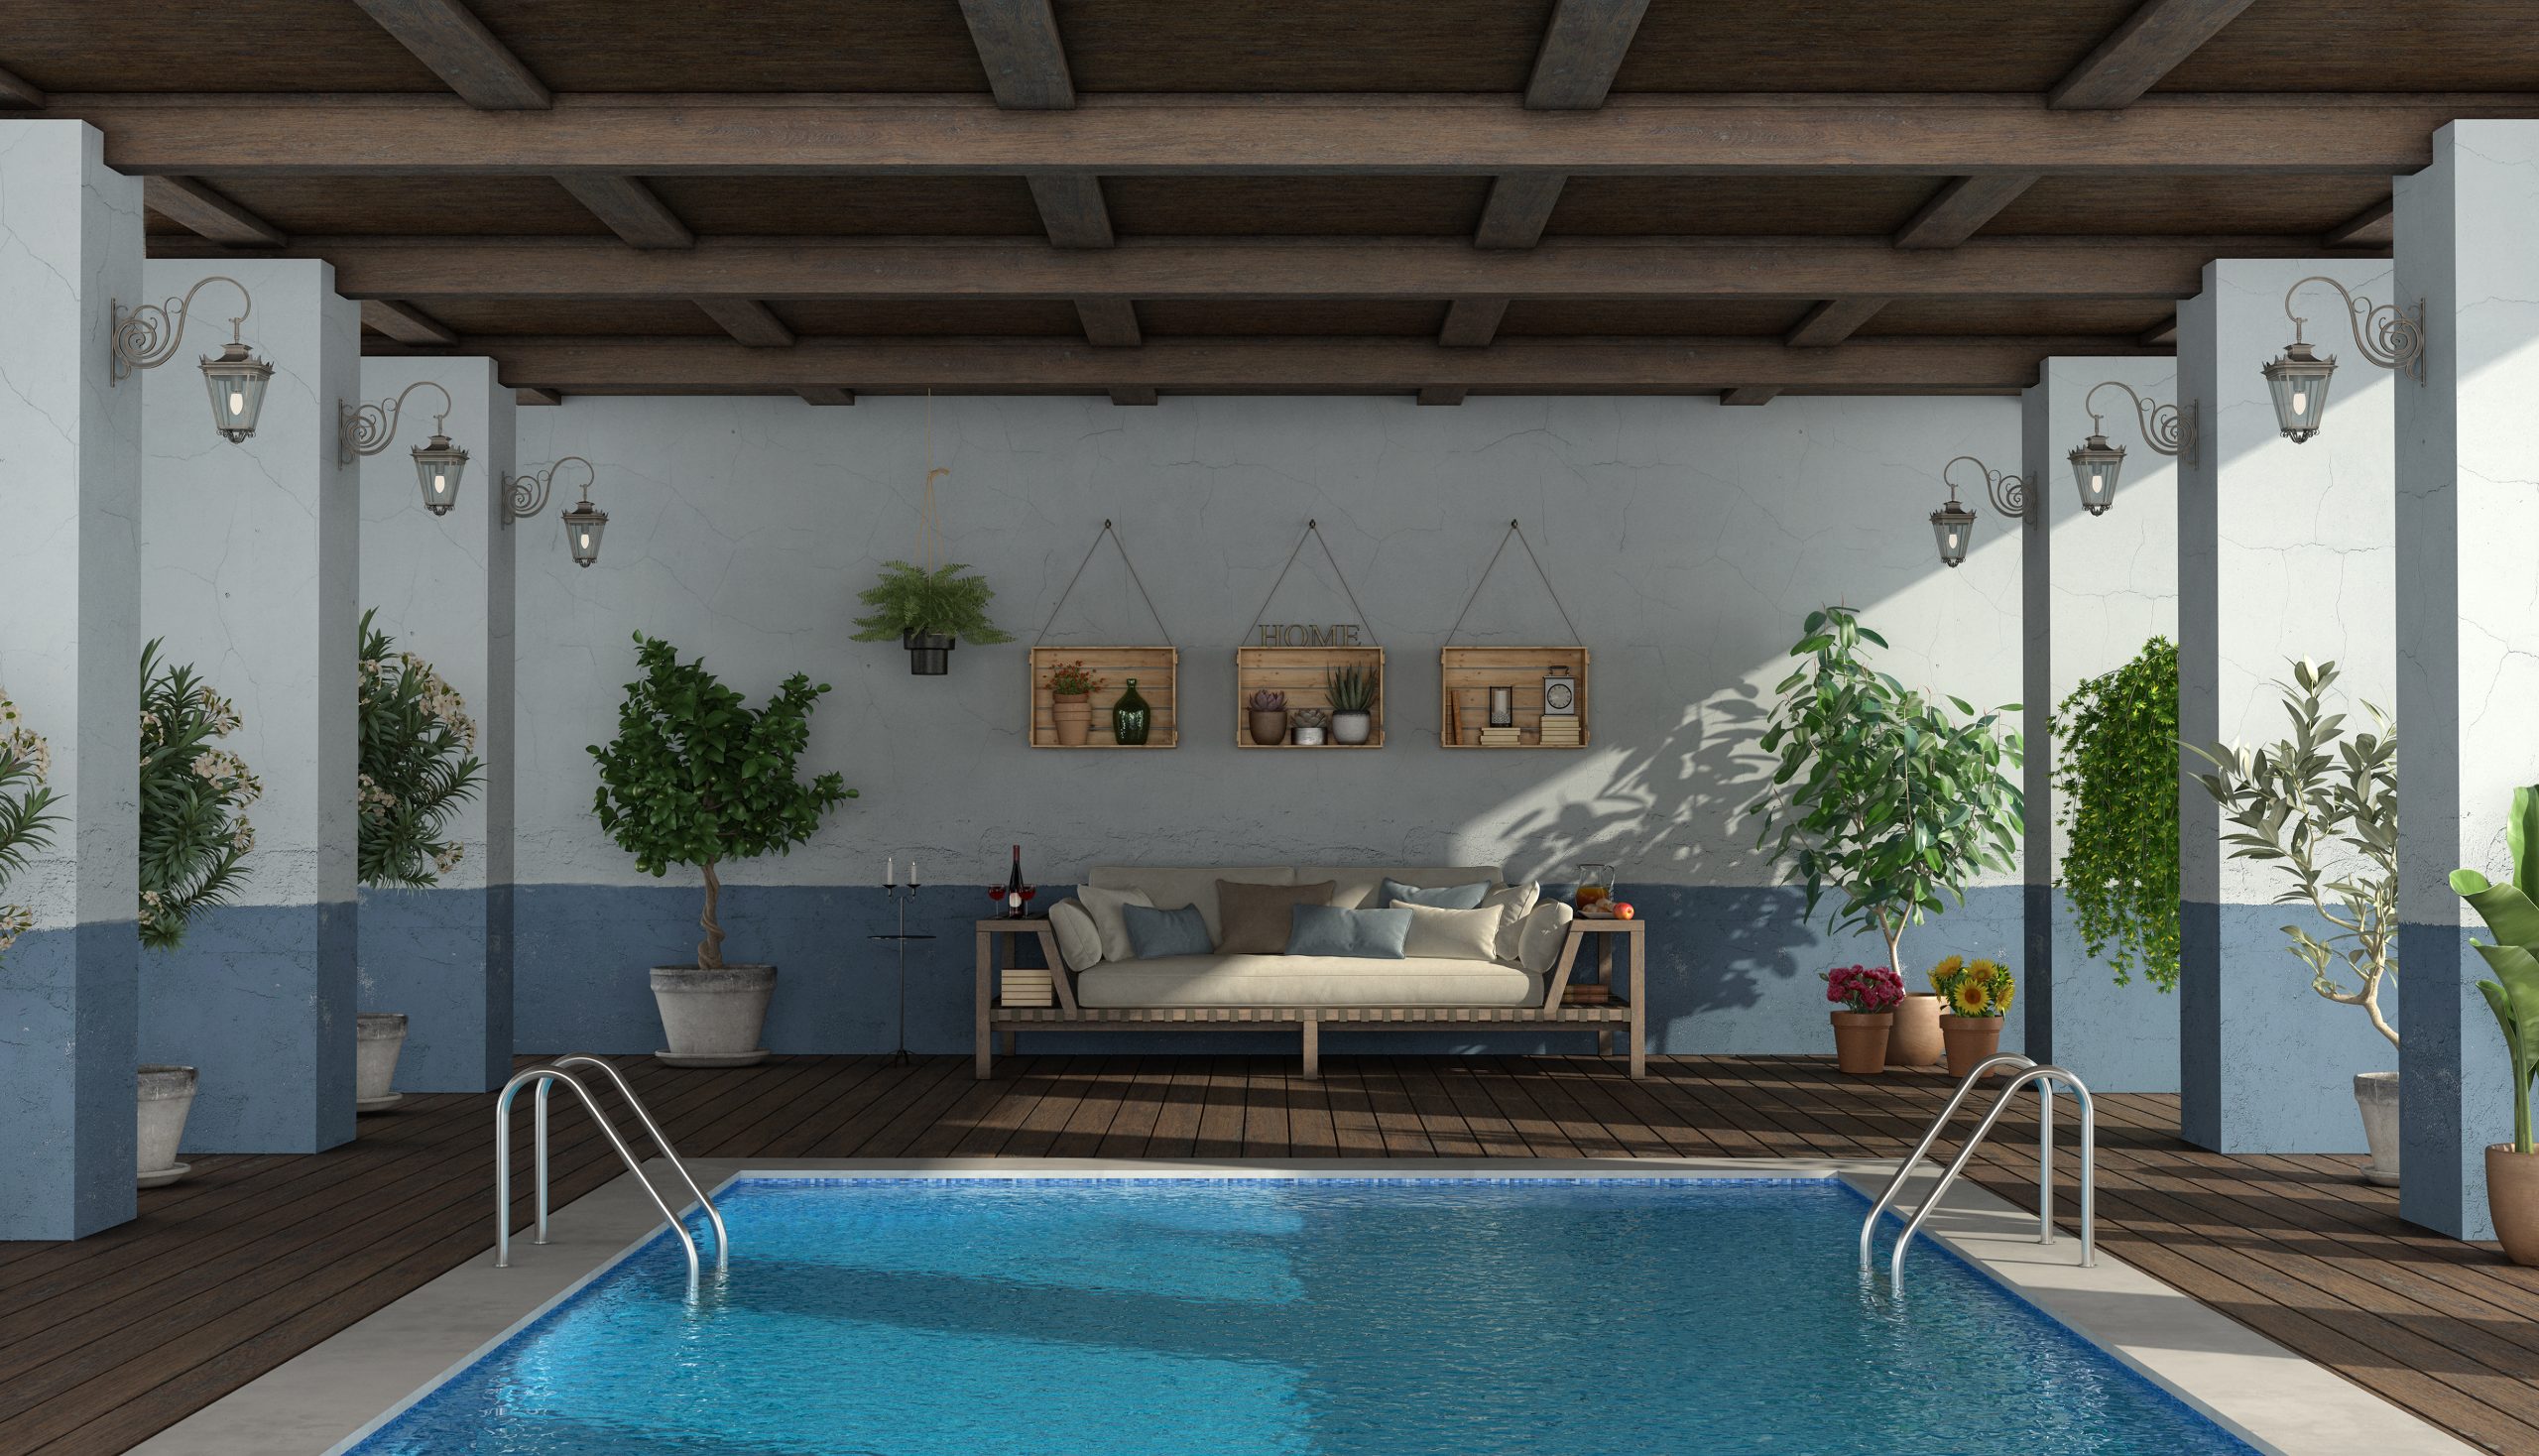 swimming-pool-under-an-old-porch-2021-08-30-02-24-48-utc-scaled